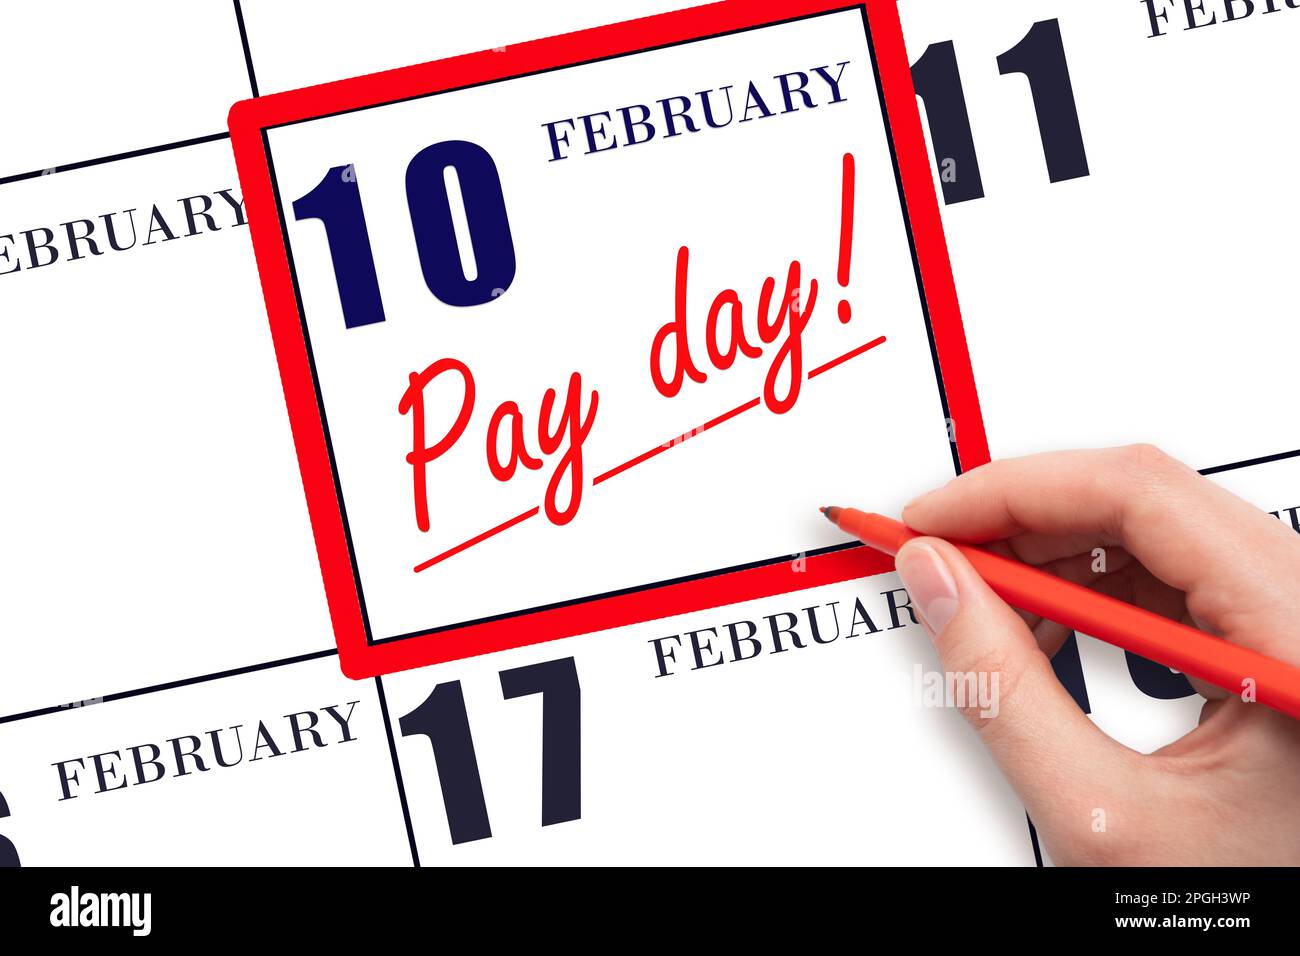 10th day of February. Hand writing text PAY DATE on calendar date February 10 and underline it. Payment due date. Reminder concept of payment. Winter Stock Photo